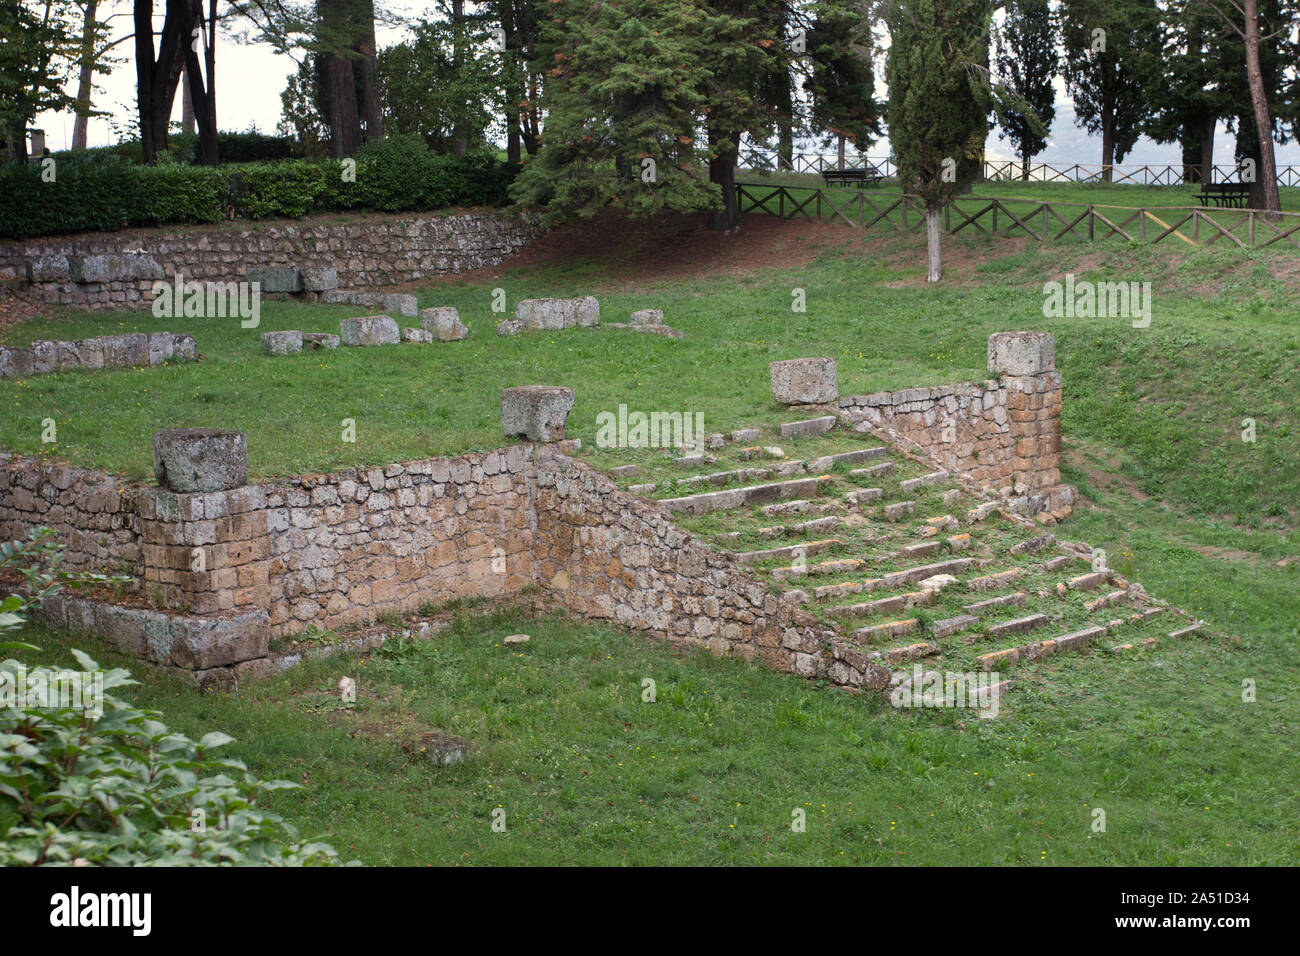 Remains of the Etruscan Temple of Belvedere (considered as one of the canonical examples of holy Etruscan architecture) - 6th C BC - Orvieto - Italy Stock Photo